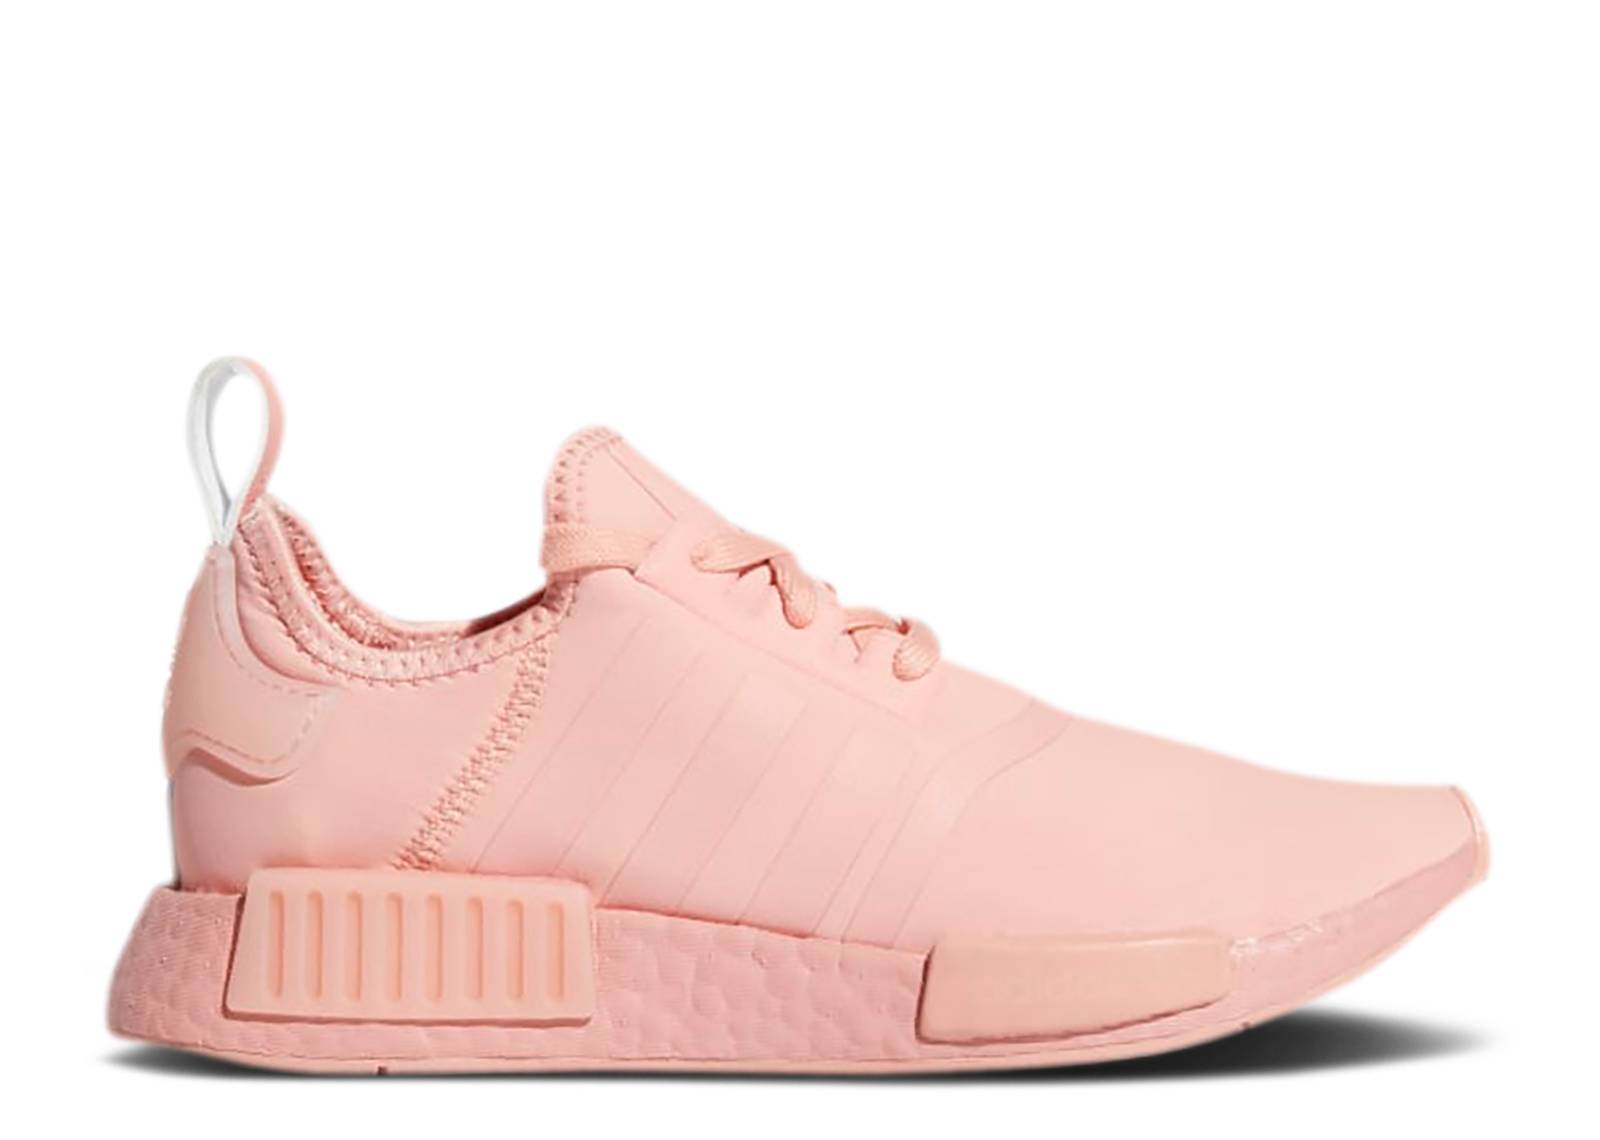 Wmns NMD_R1 'Trace Pink'